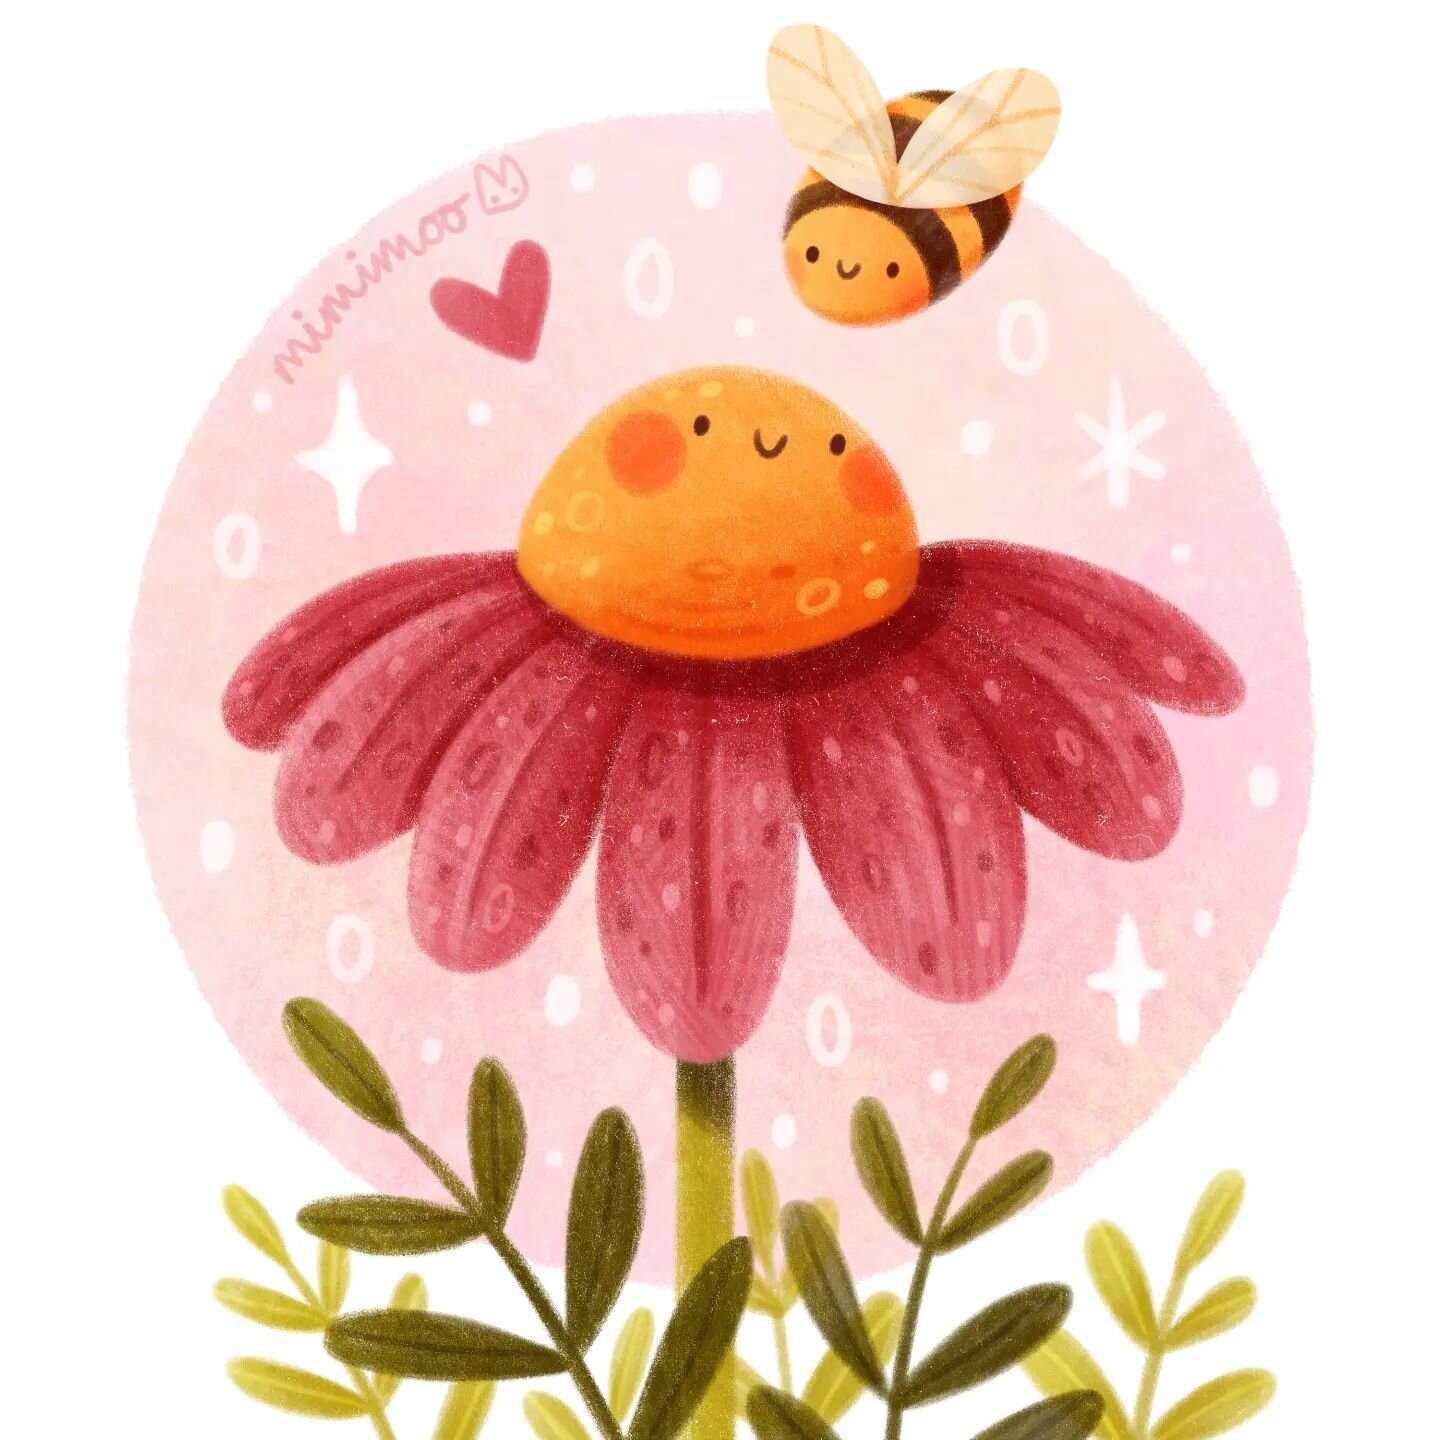 Enjoying using my brushes in different ways at the moment for different texture effects. Also can't stop drawing flowers 😄🌷🐝

🌷 Brushes I used (from my brush packs): Mimi Simple Sketching, Mimi Chunky Pencil, Mimi Medium Crayon, Mimi Texture Medi